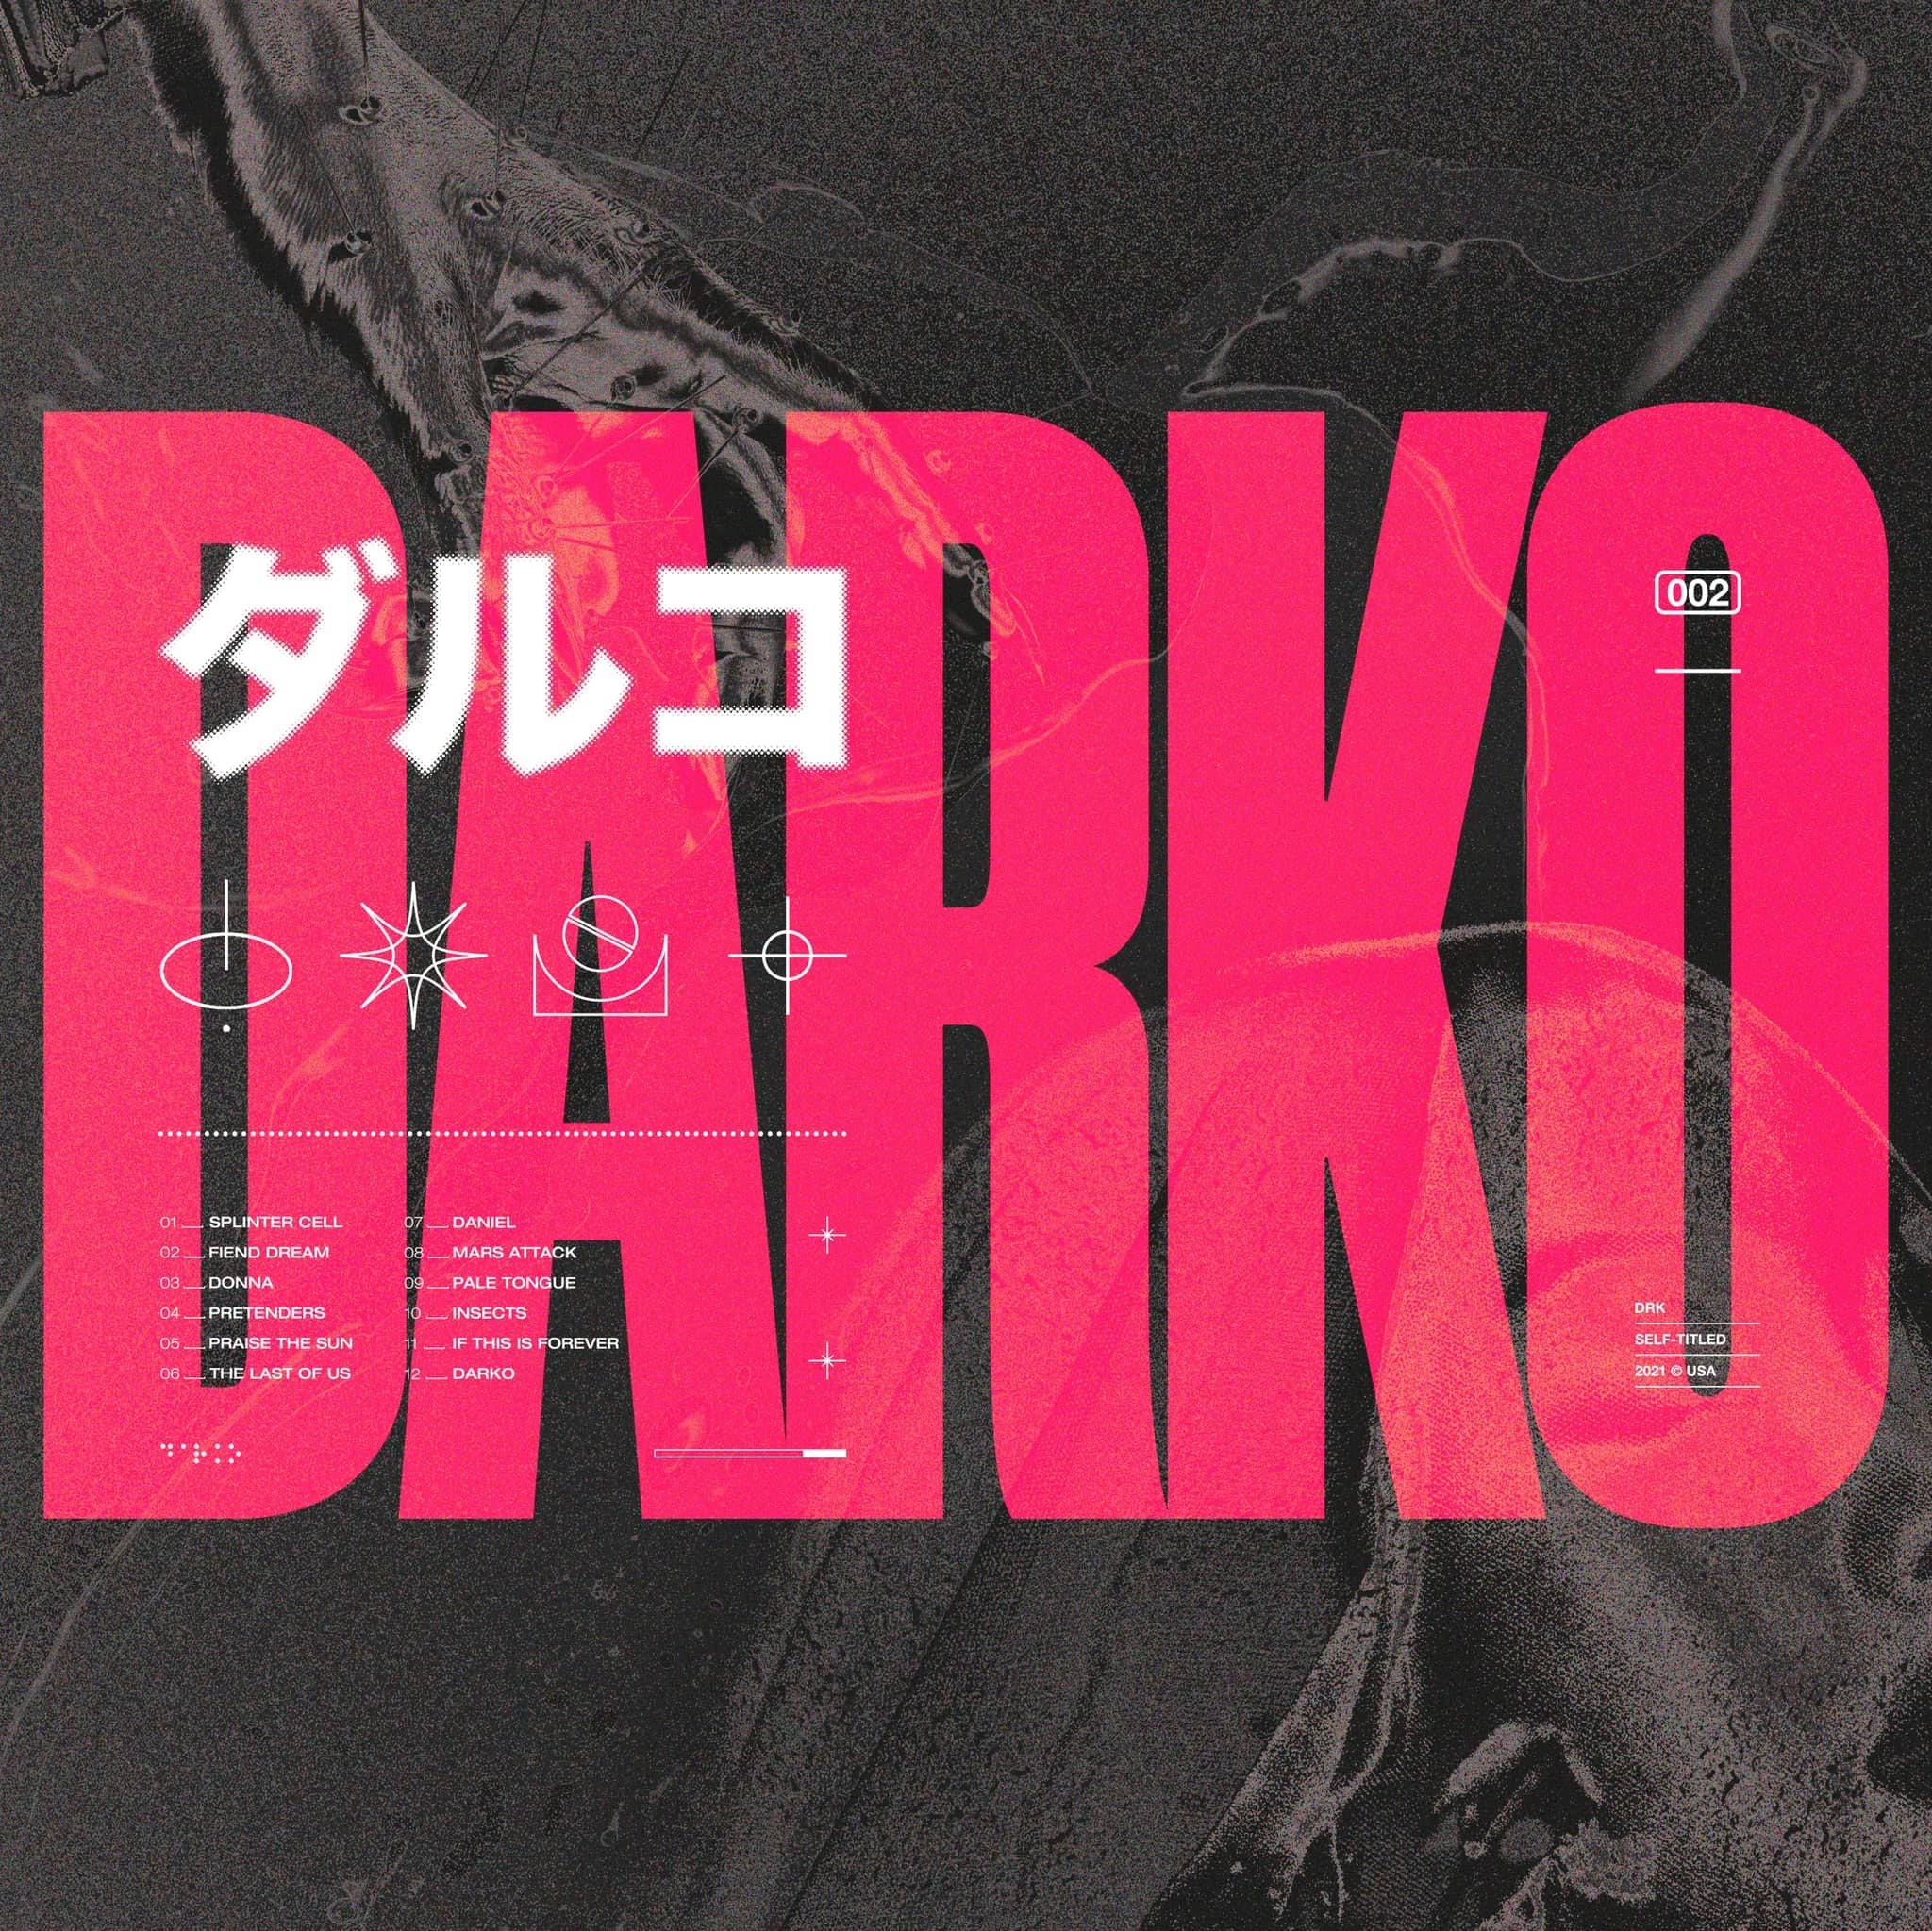 Darko Thank You To Everyone Who Has Been Jamming Our New Record